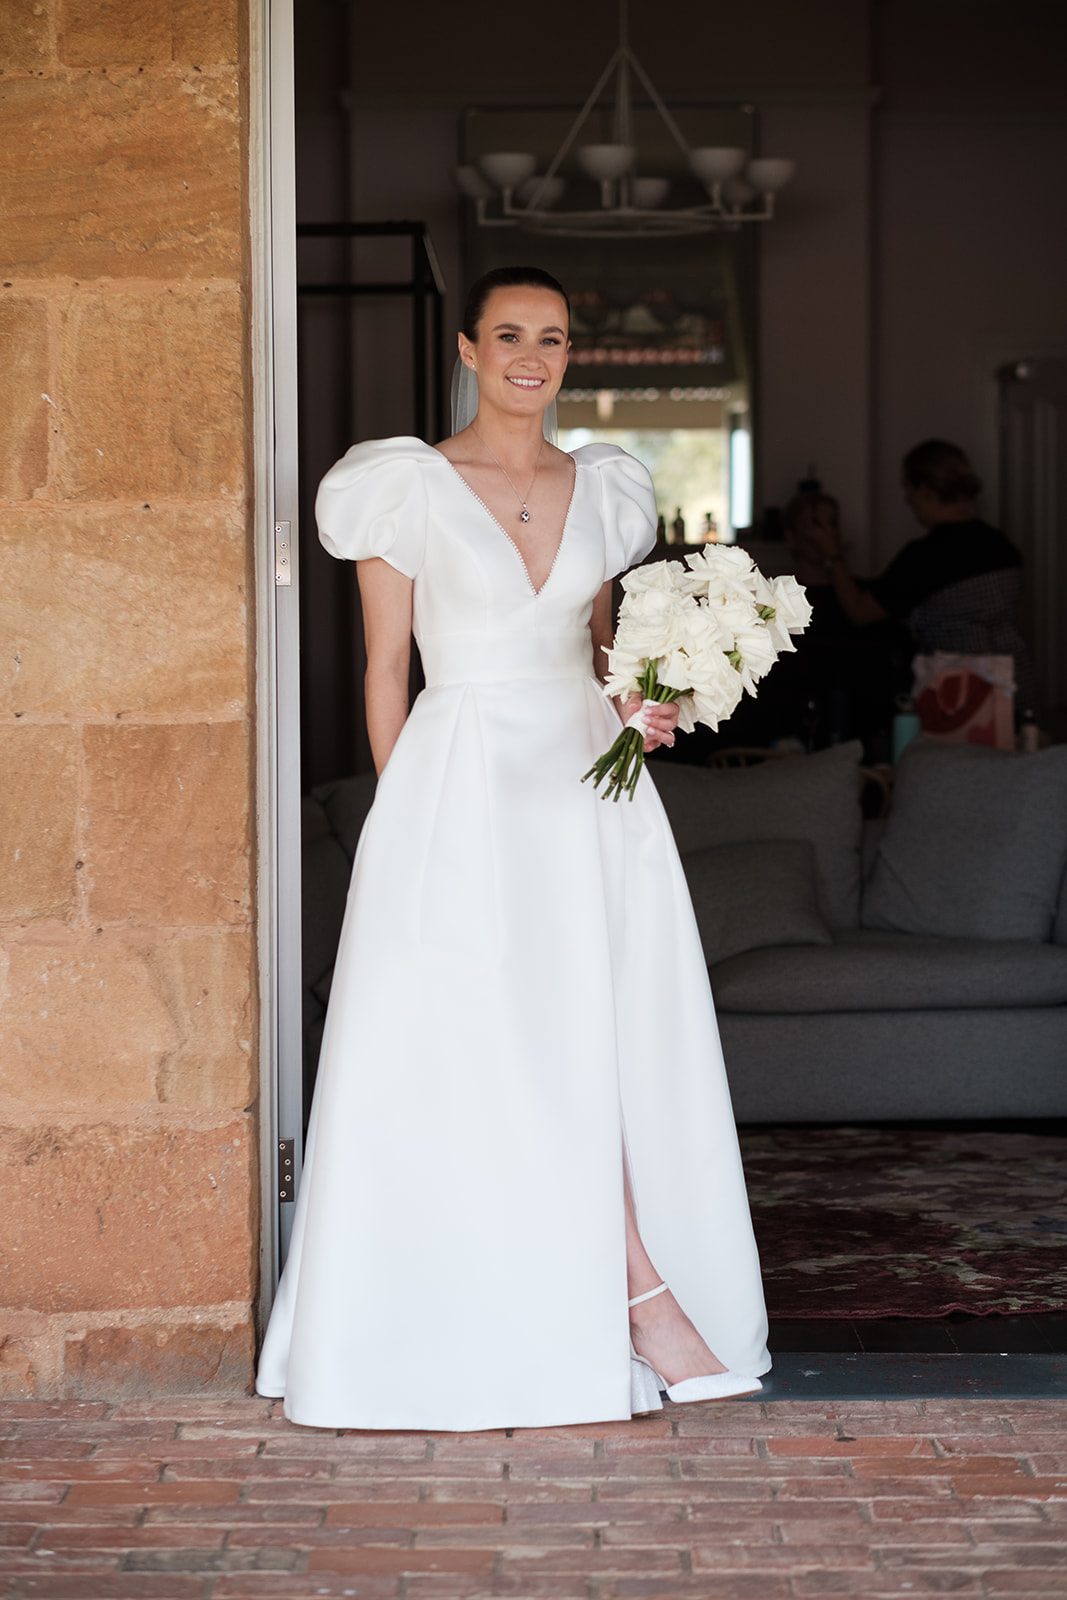 Bride Katie standing in a doorway on her wedding day at Kingsford Homestead in the Barossa Valley, South Australia